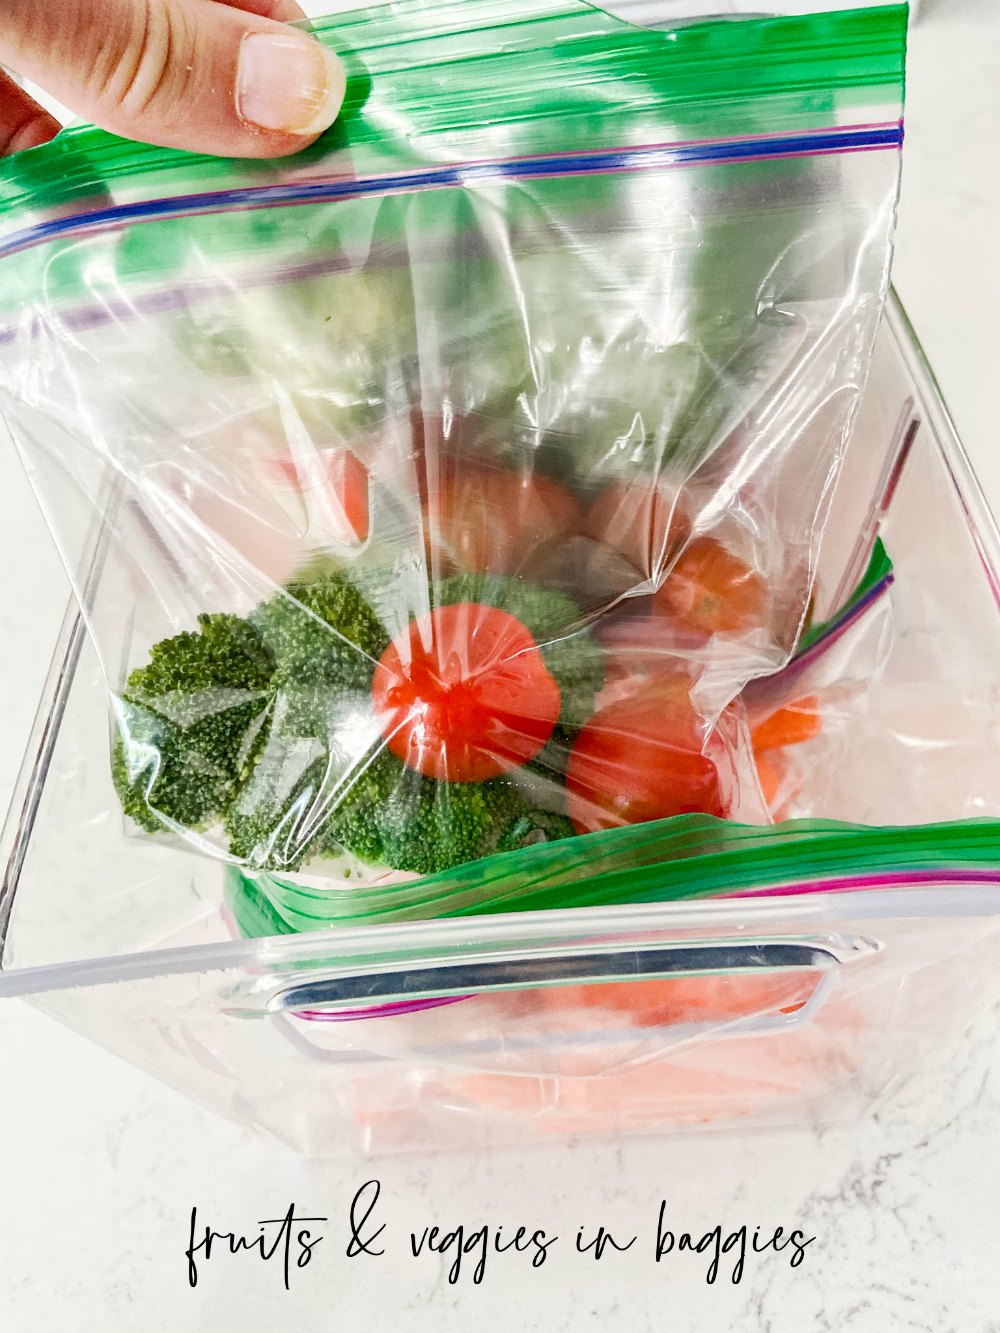 Easy Kids' Grab-and-Go Snacks and Lunches! With kids home more, here are some easy ways for them to grab healthy snacks and lunches with no fuss! 